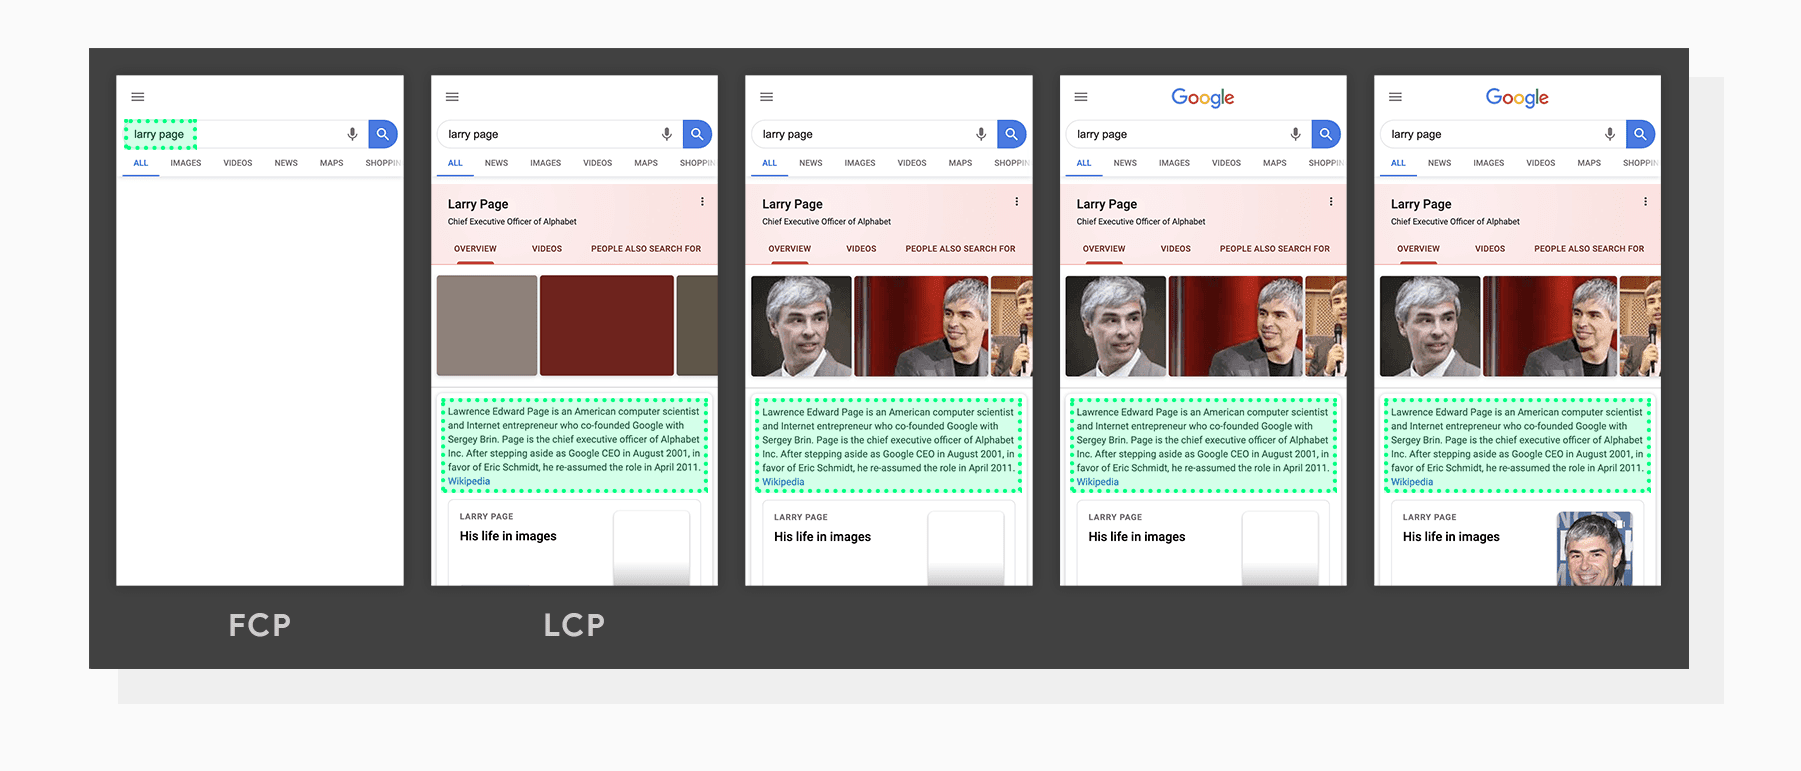 An example of LCP in Google mobile search